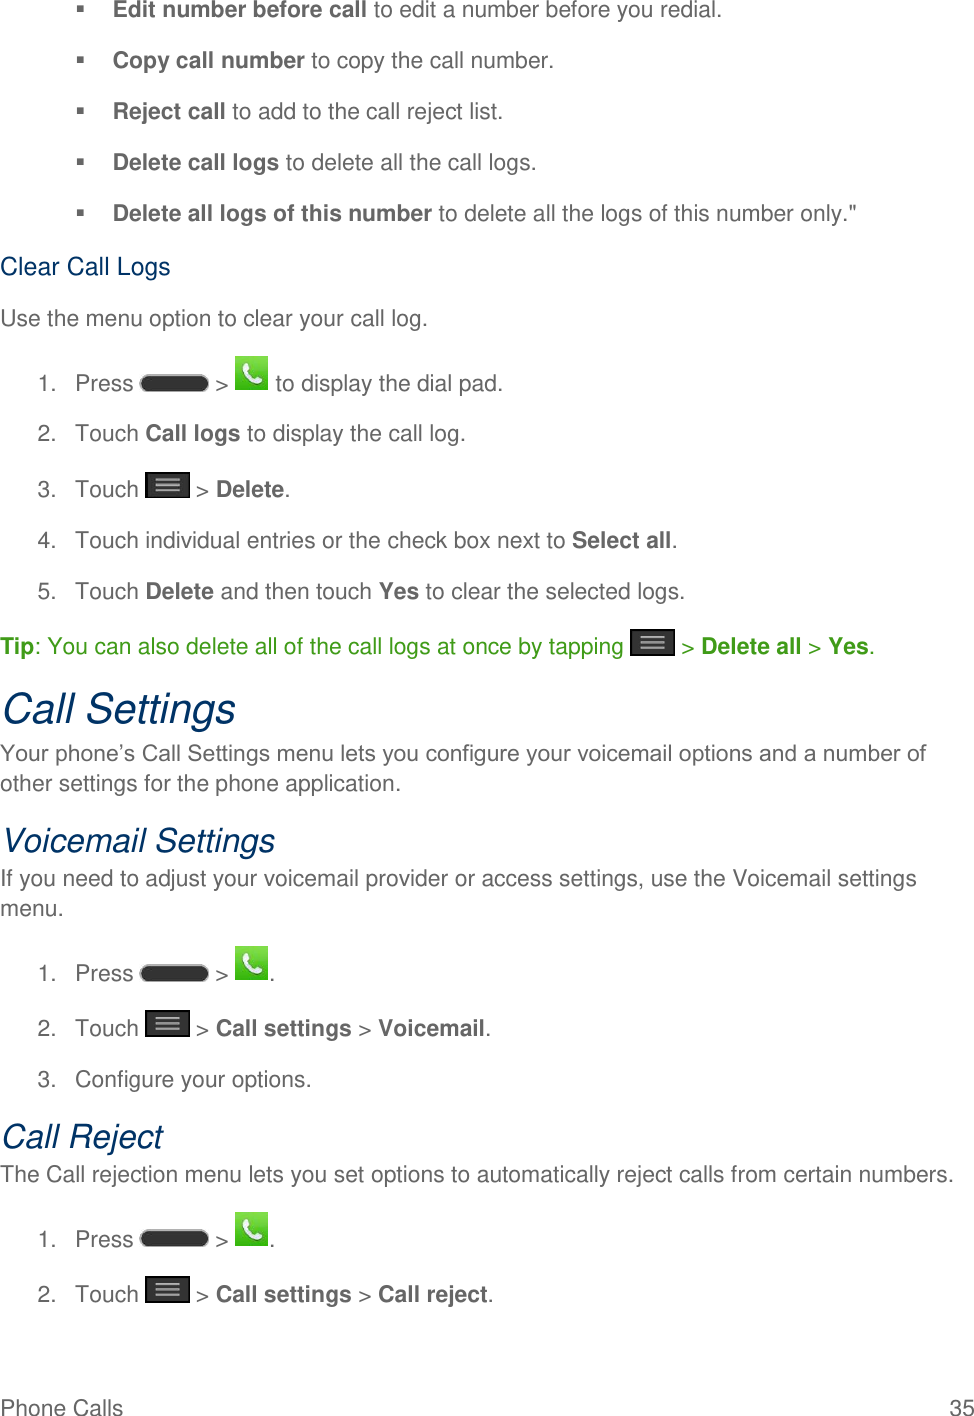 Phone Calls  35  Edit number before call to edit a number before you redial.   Copy call number to copy the call number.   Reject call to add to the call reject list.   Delete call logs to delete all the call logs.   Delete all logs of this number to delete all the logs of this number only.&quot; Clear Call Logs Use the menu option to clear your call log. 1.  Press   &gt;   to display the dial pad. 2.  Touch Call logs to display the call log. 3.  Touch   &gt; Delete. 4.  Touch individual entries or the check box next to Select all. 5.  Touch Delete and then touch Yes to clear the selected logs. Tip: You can also delete all of the call logs at once by tapping   &gt; Delete all &gt; Yes. Call Settings Your phone‘s Call Settings menu lets you configure your voicemail options and a number of other settings for the phone application. Voicemail Settings If you need to adjust your voicemail provider or access settings, use the Voicemail settings menu. 1.  Press   &gt;  . 2.  Touch   &gt; Call settings &gt; Voicemail. 3.  Configure your options. Call Reject The Call rejection menu lets you set options to automatically reject calls from certain numbers. 1.  Press   &gt;  . 2.  Touch   &gt; Call settings &gt; Call reject. 